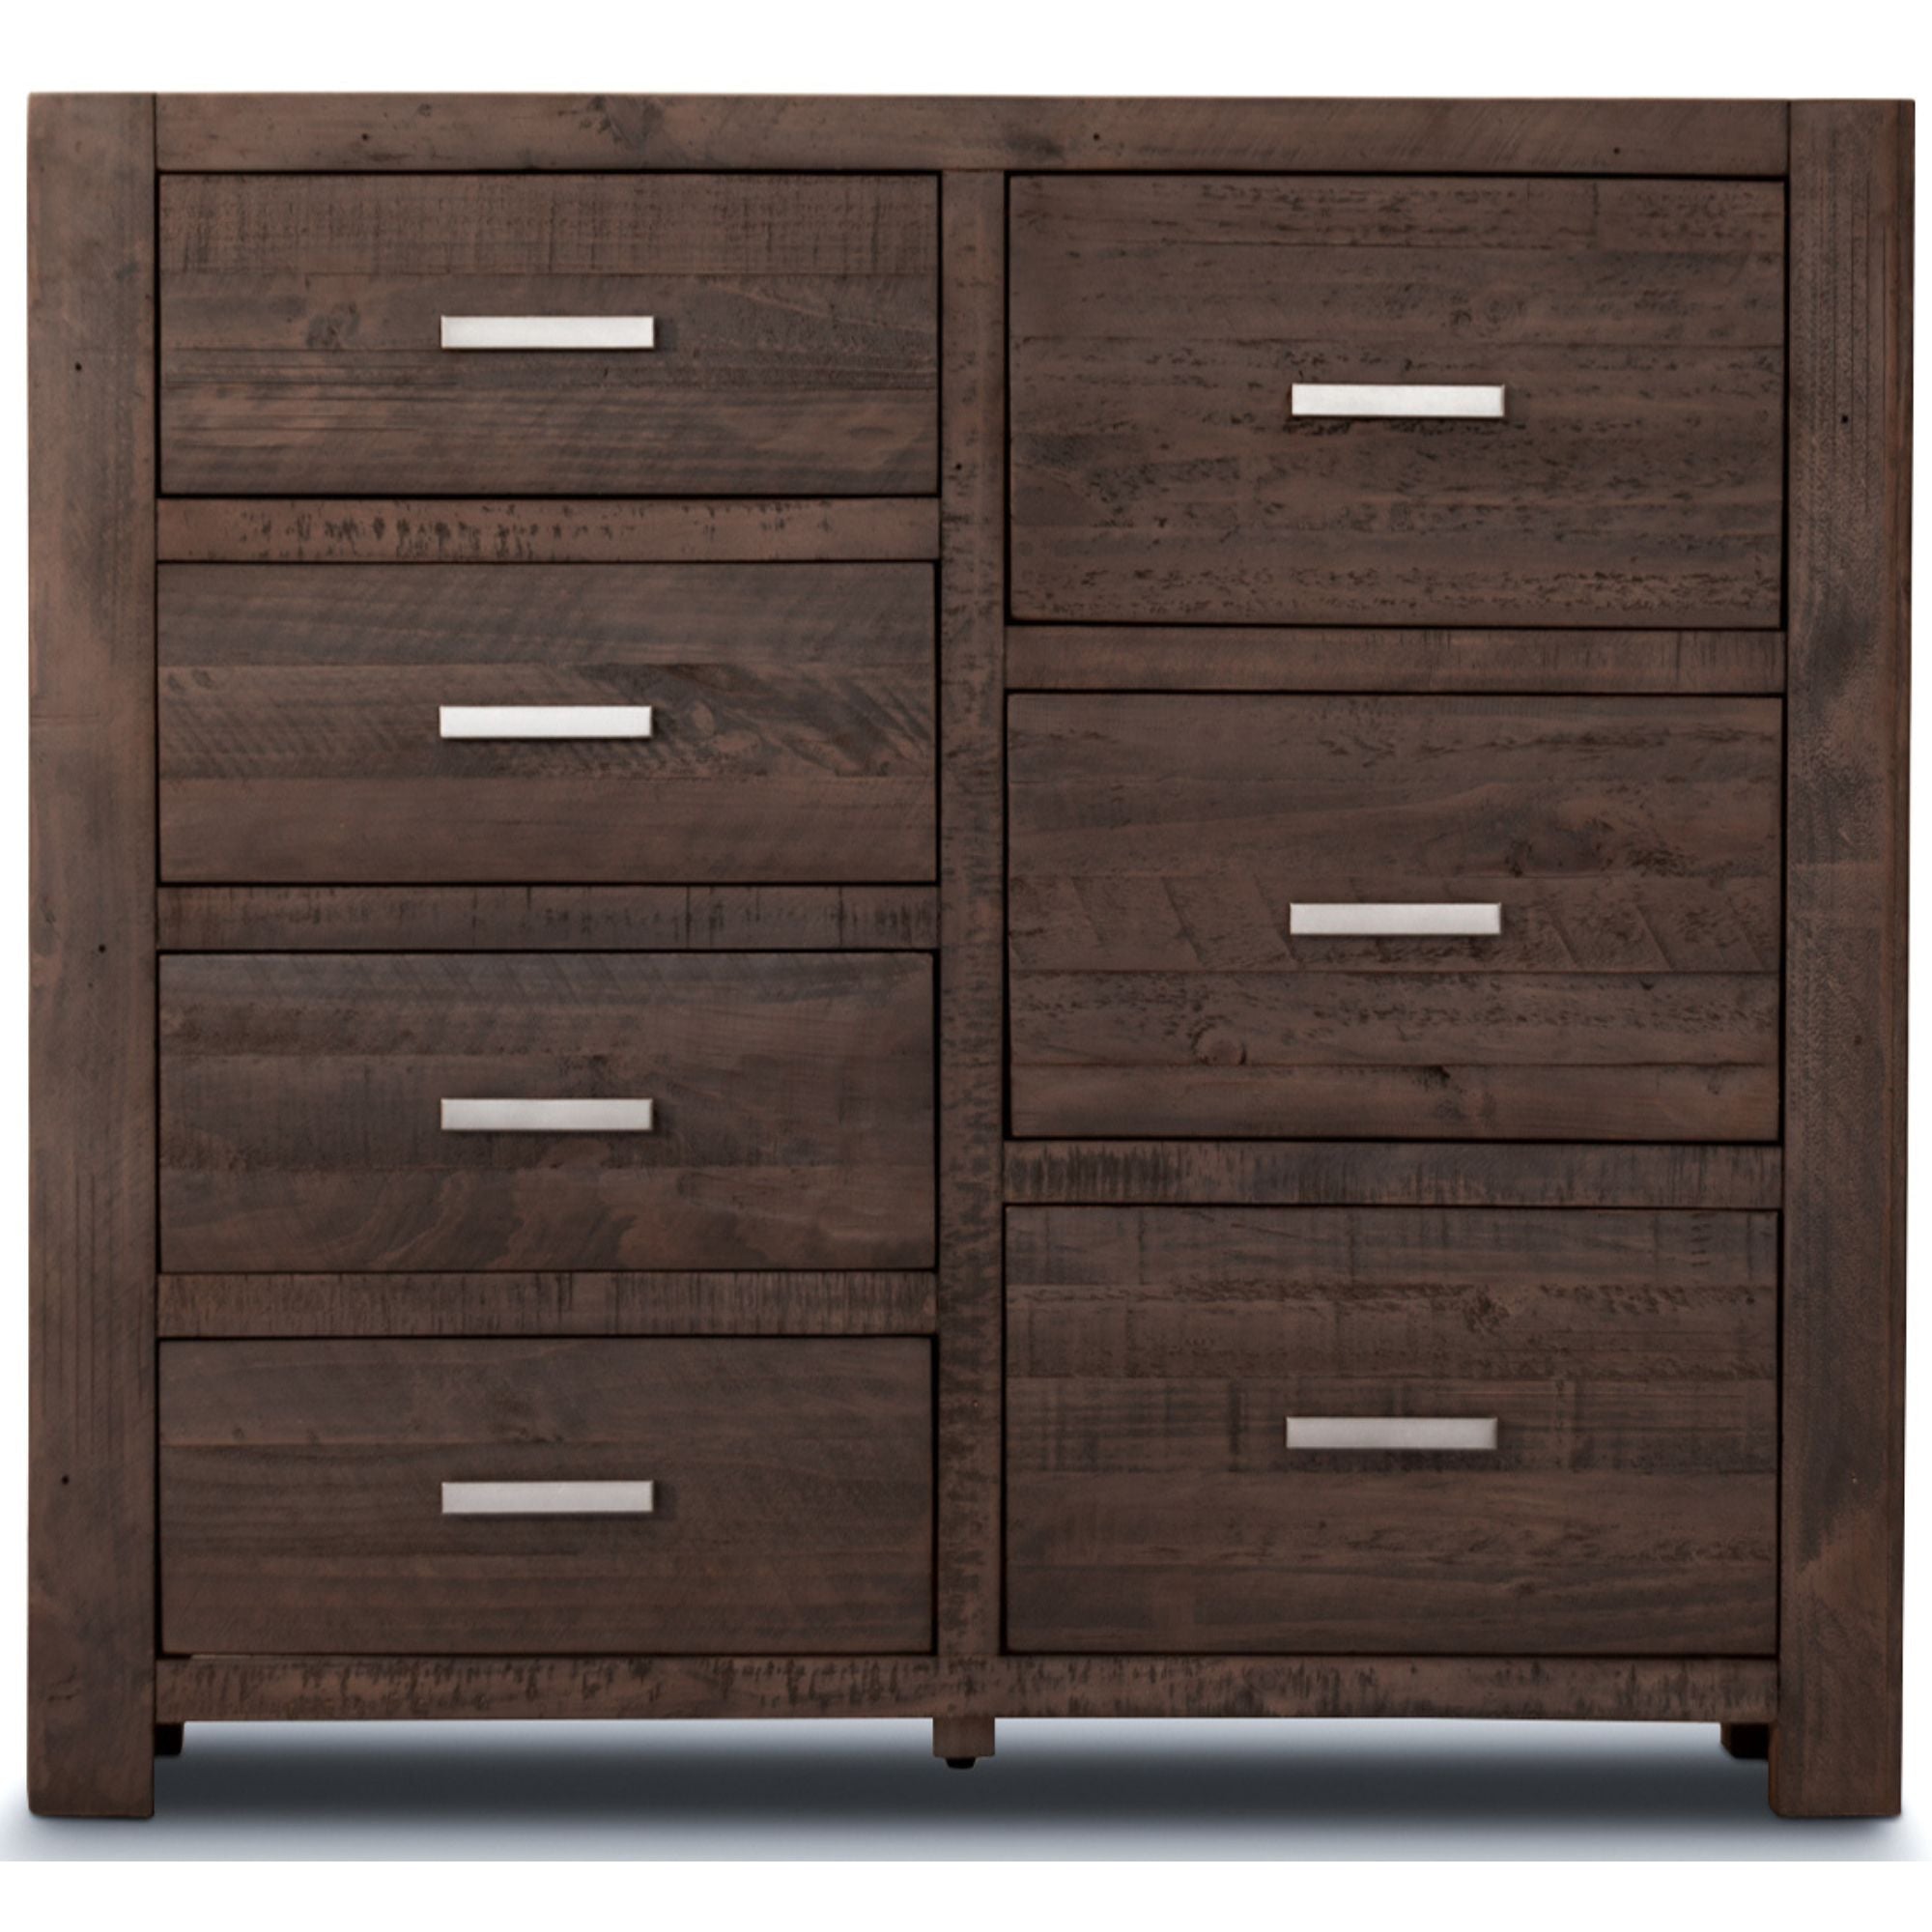 Catmint Tallboy 7 Chest of Drawers Pine Wood Bed Storage Cabinet - Grey Stone Deals499